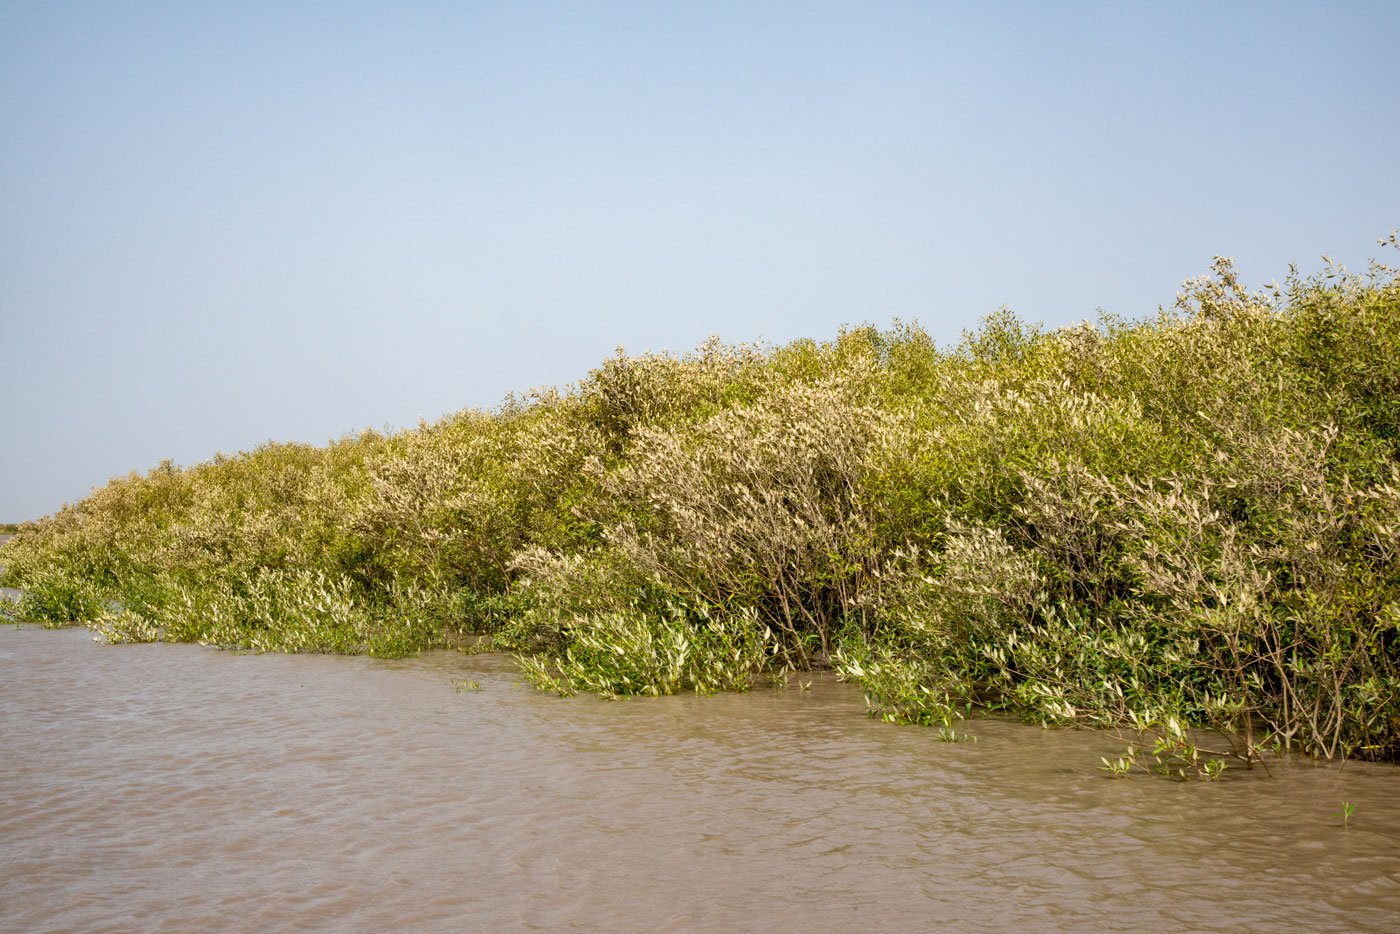 The thick mangrove cover of the Marine National Park and Sanctuary located in northwest Saurashtra region of Gujarat